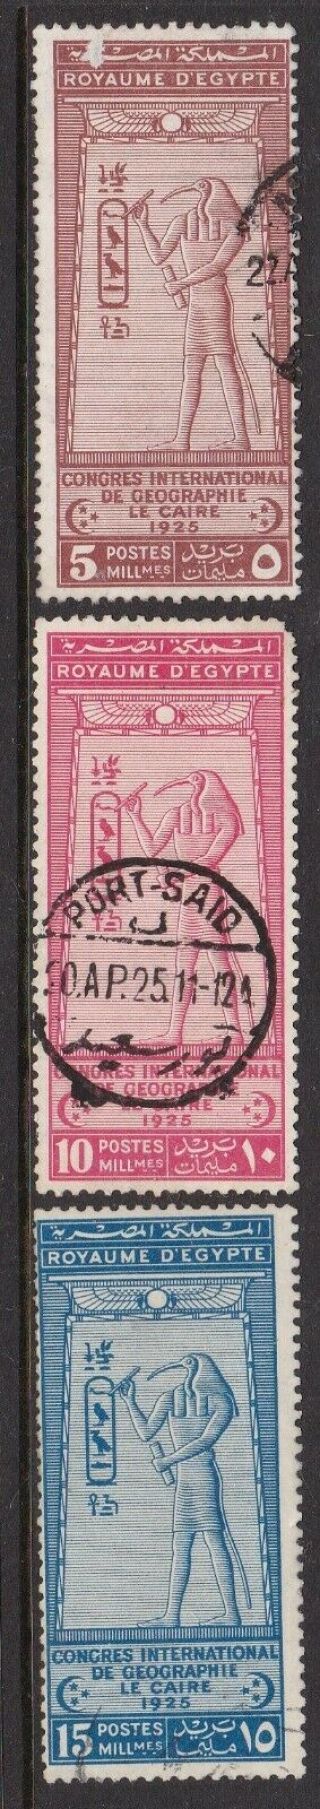 Egypt 1925 Geographical Congress Set Fine (faults)